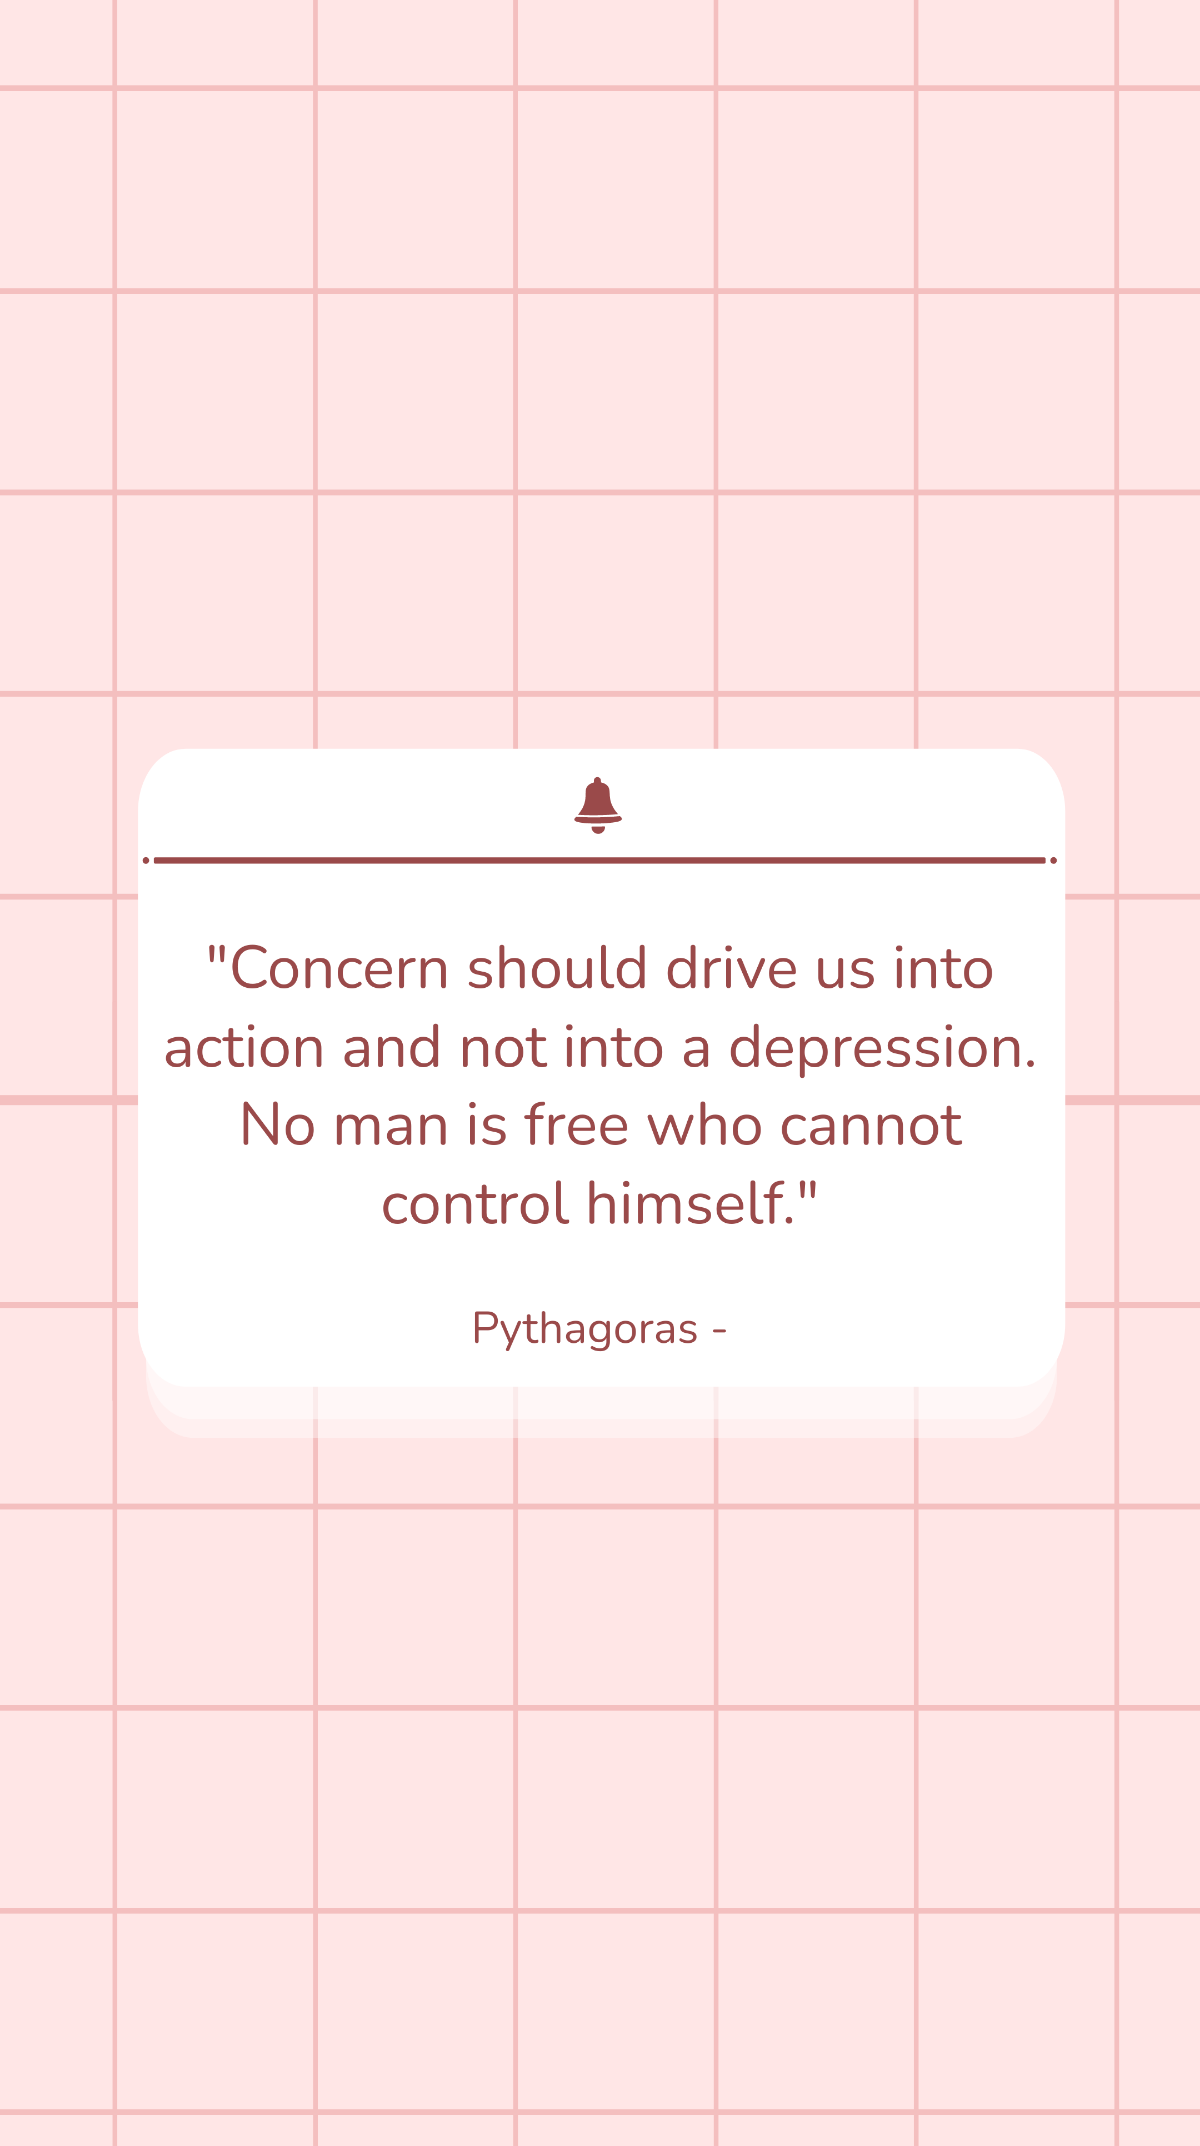 Pythagoras - Concern should drive us into action and not into a depression. No man is who cannot control himself. Template